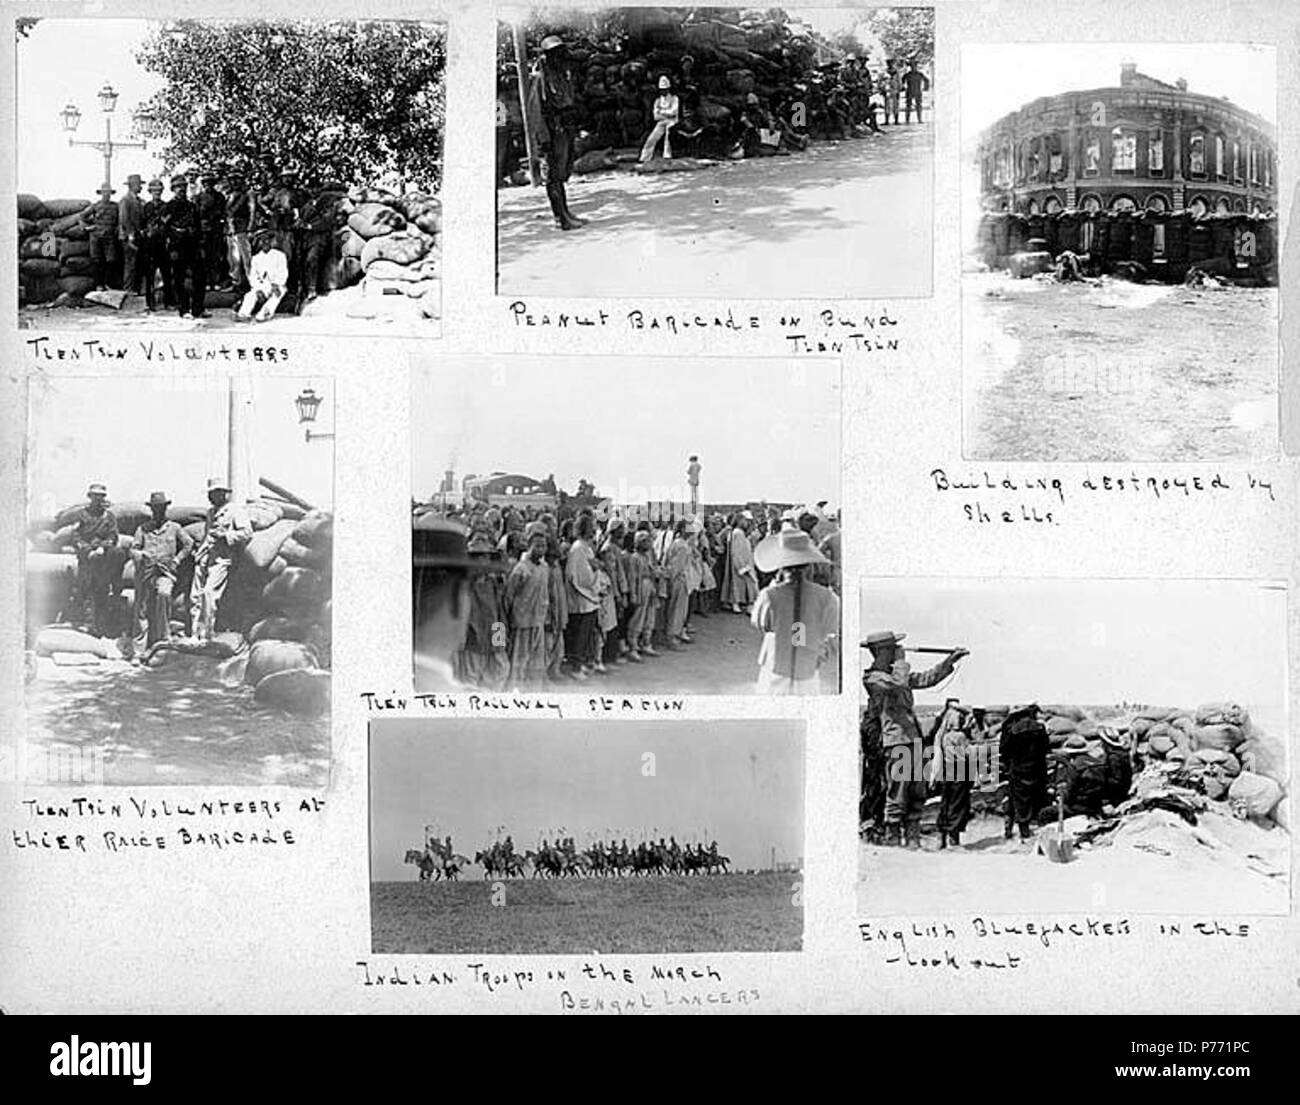 . English: 7.04 Tien Tsin volunteers, Indian troops, and English Bluejackets, 1900 . English: Captions on album page: Tien Tsin volunteers; Peanut baricade on Bund, Tien Tsin; Building destroyed by shells; Tien Tsin volunteers at their Raice [i.e., rice] Baricade; Tien Tsin railway station; Indian troops on the march, Bengal Lancers; English Blue Jackets on the Lookout . PH Coll 241.B4a-g Subjects (LCTGM): Volunteers--China--Tianjin; Barricades--China--Tianjin; War damage--China--Tianjin; Railroad stations--China--Tianjin; Lancers--Indian--China--Tianjin; Horses--China--Tianjin; Sailors--Briti Stock Photo